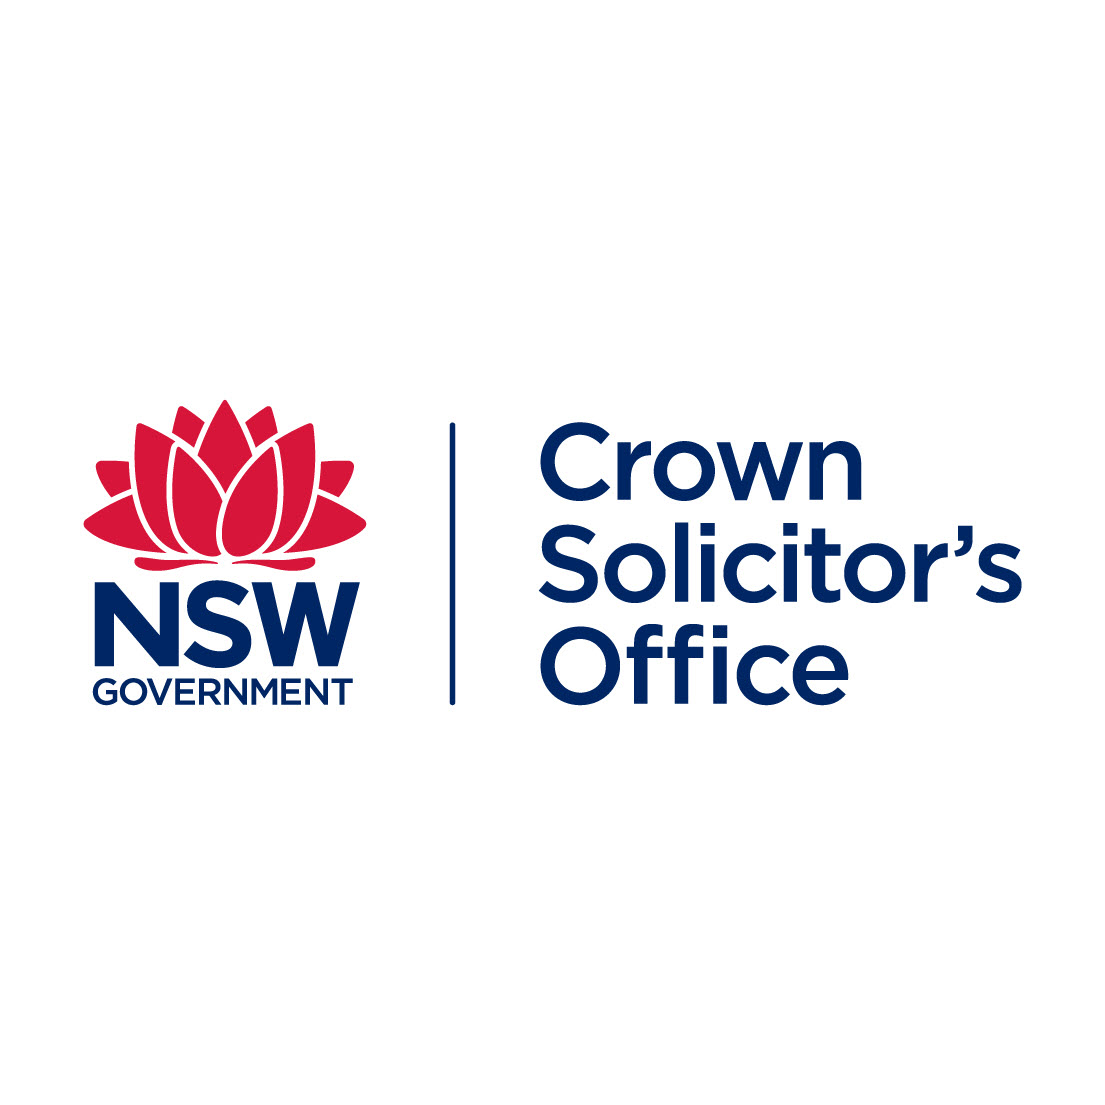 Crown Solicitor's Office (NSW) Sydney